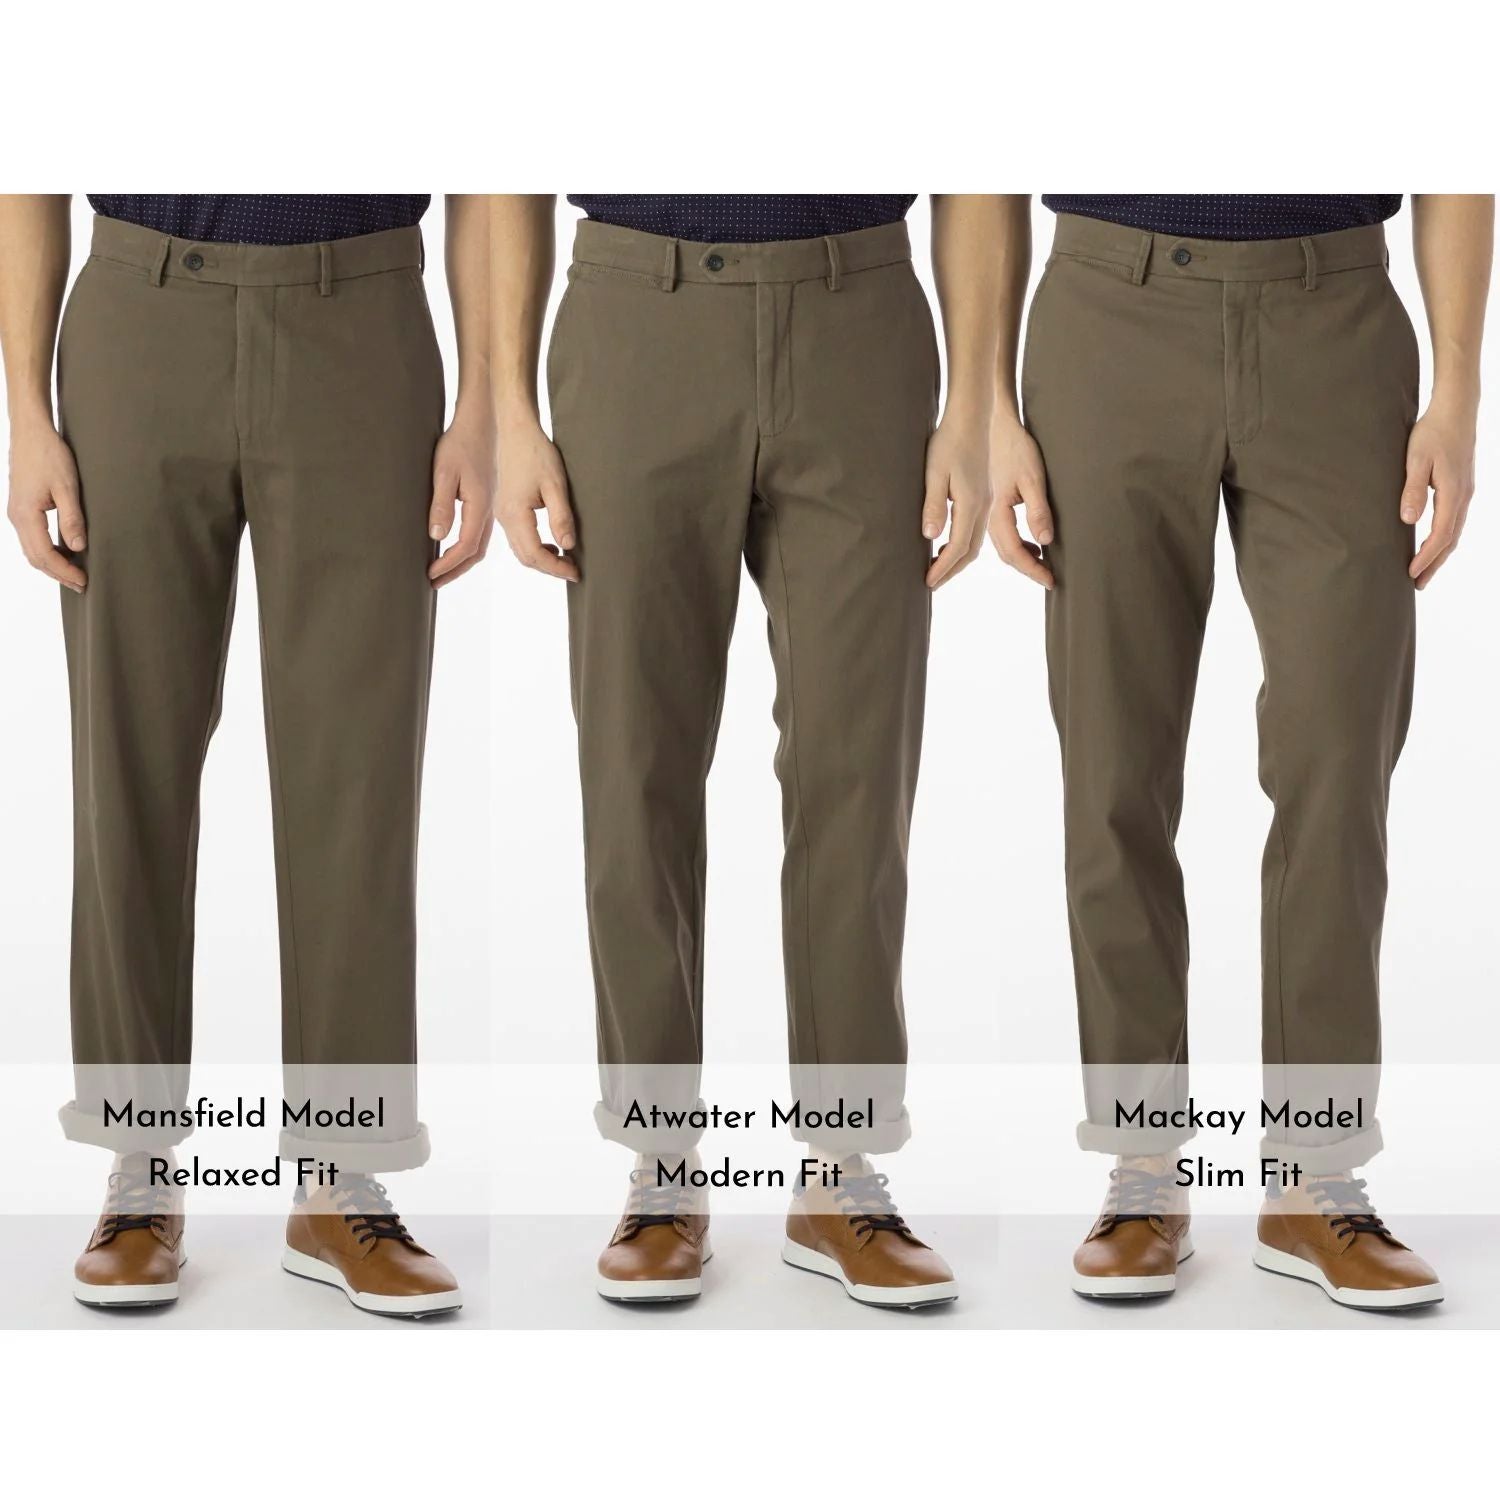 Perma Color Pima Twill Khaki Pants in Fatigue (Flat Front Models) by Ballin